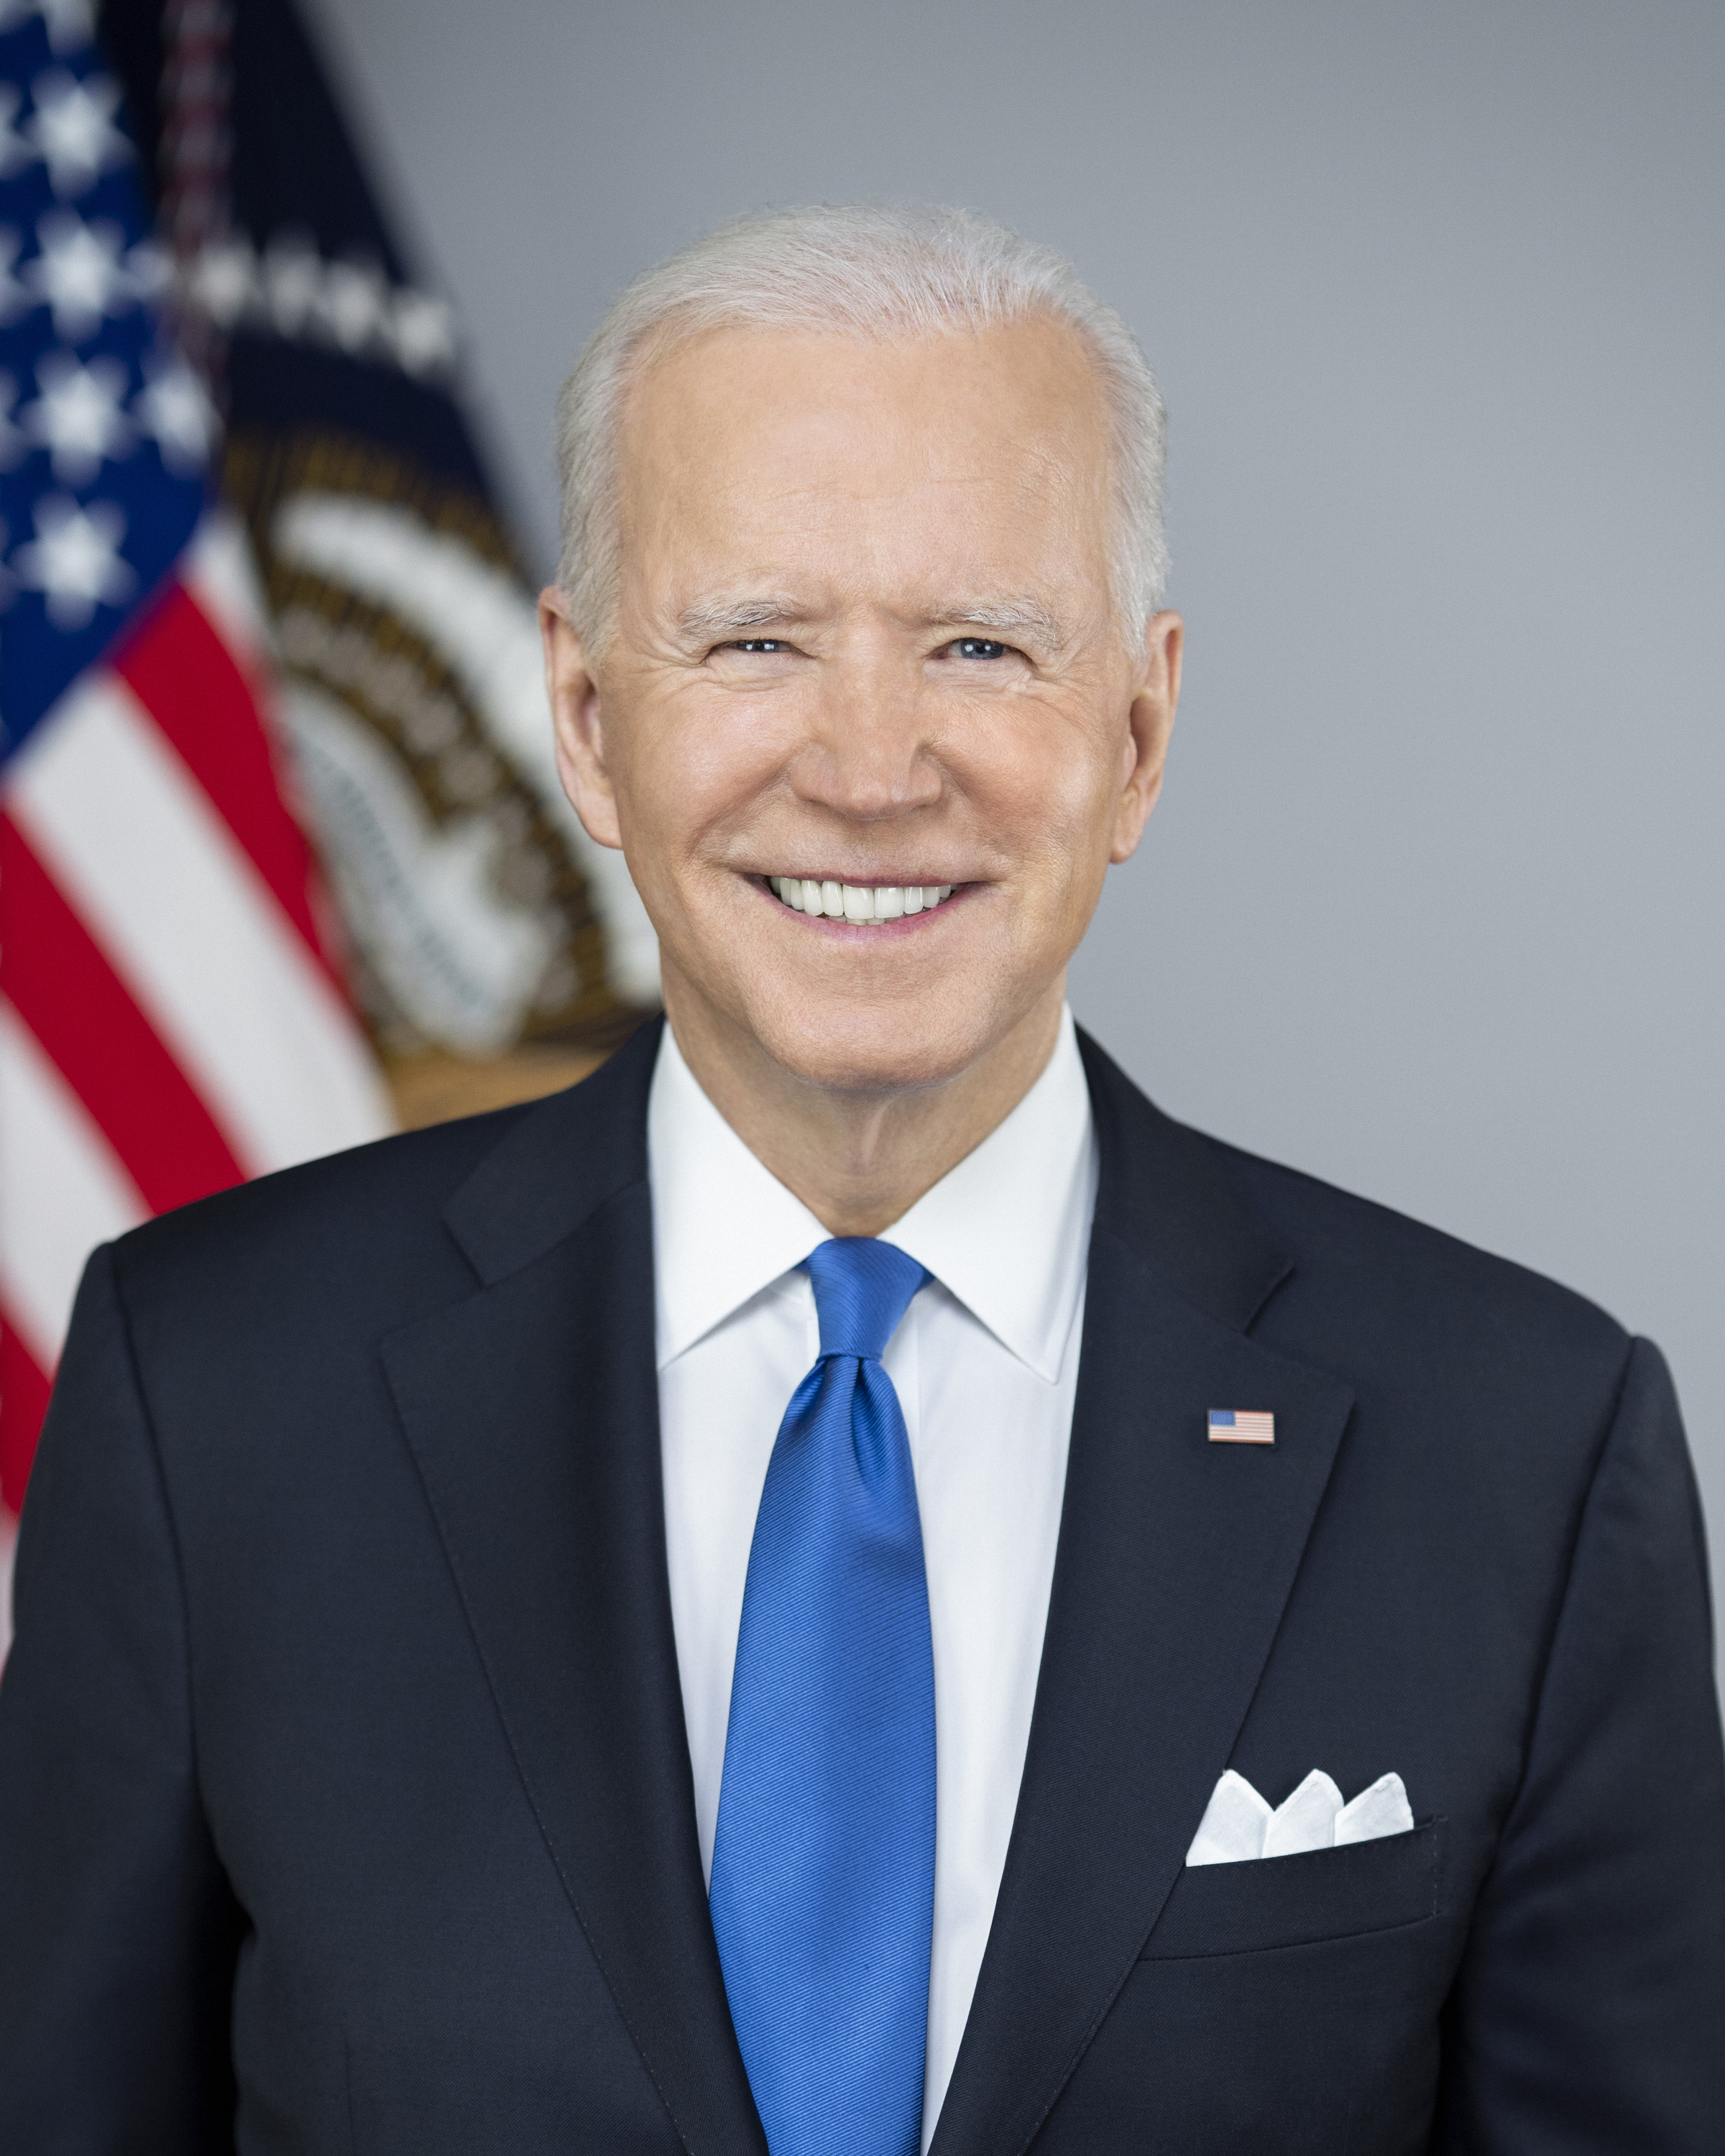 President Joe Biden poses for his official portrait Wednesday, March 3, 2021, in the Library of the White House. (Official White House Photo by Adam Schultz)